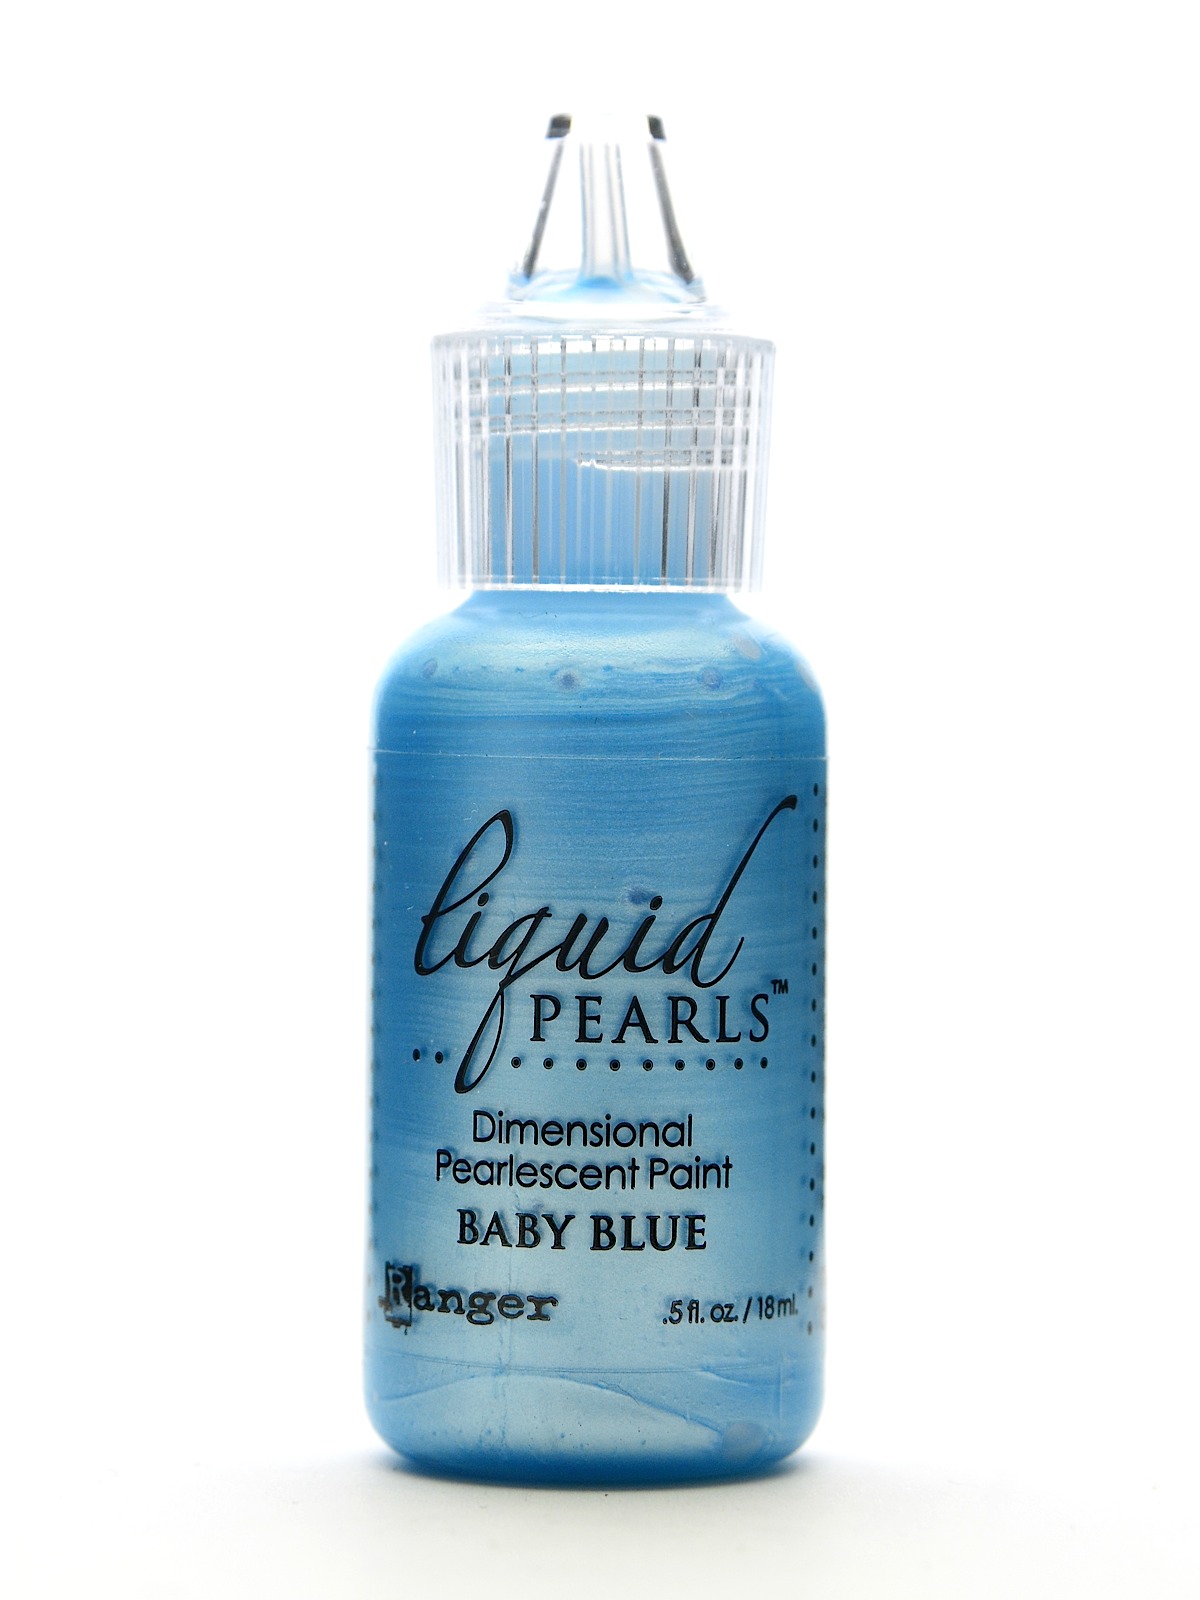 Liquid Pearls Pearlescent Paint Baby Blue 0.5 Oz. Bottle